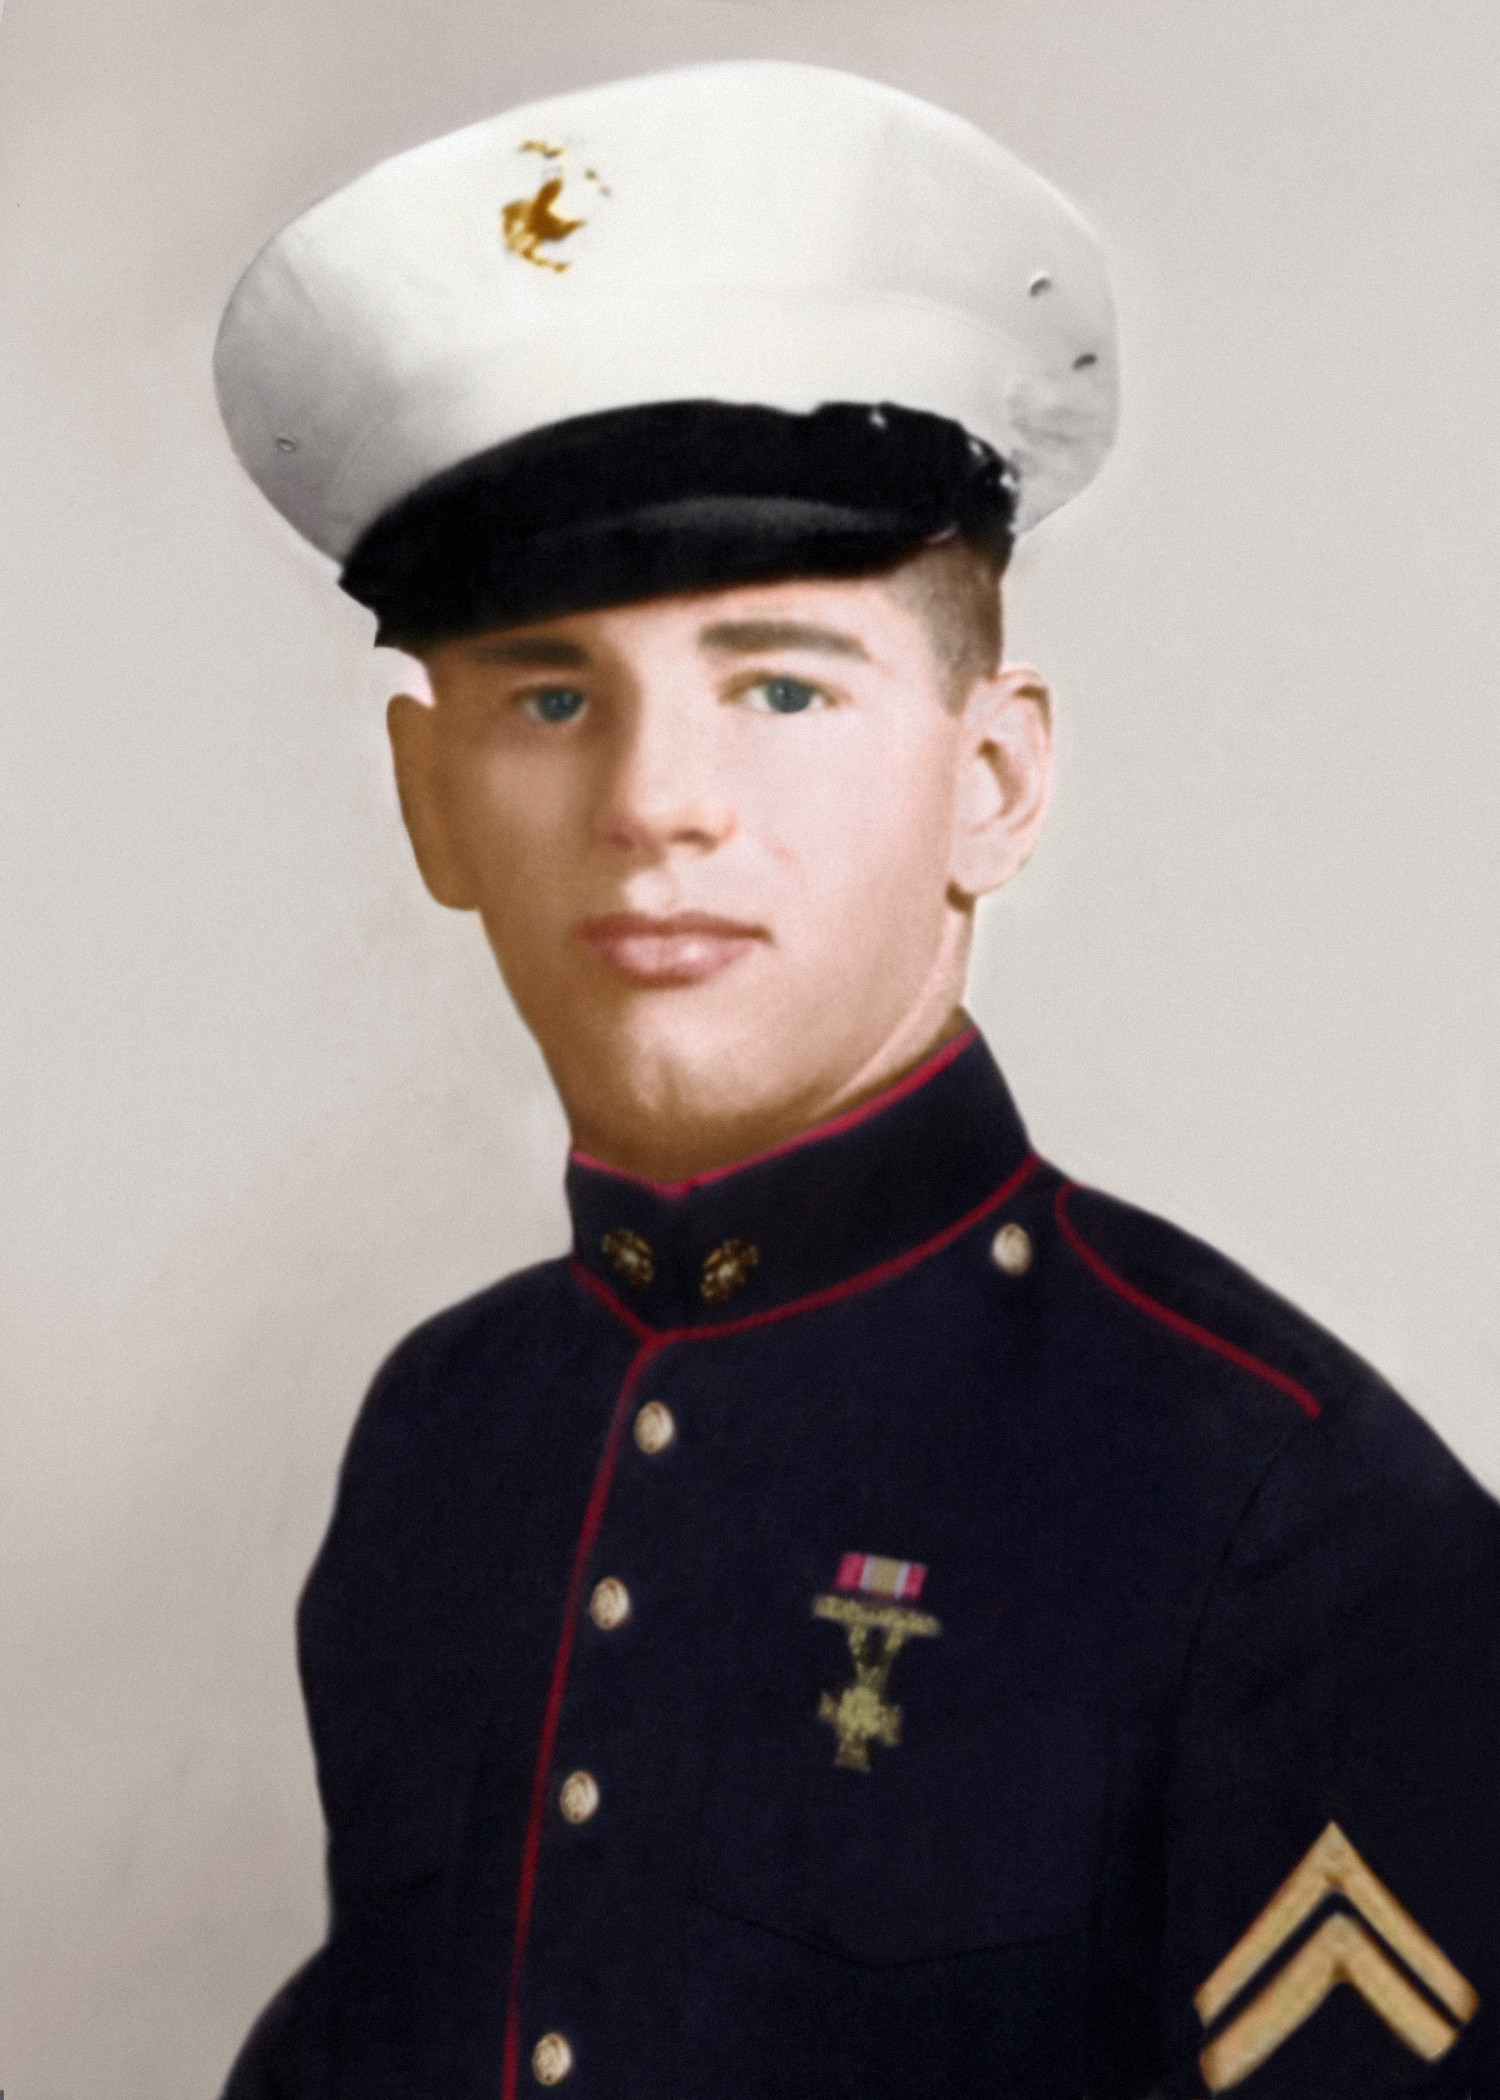 Richard Brockman in his Marine Dress Blues, the ribbon on his uniform is the World War II victory ribbon for the Marine Corps.